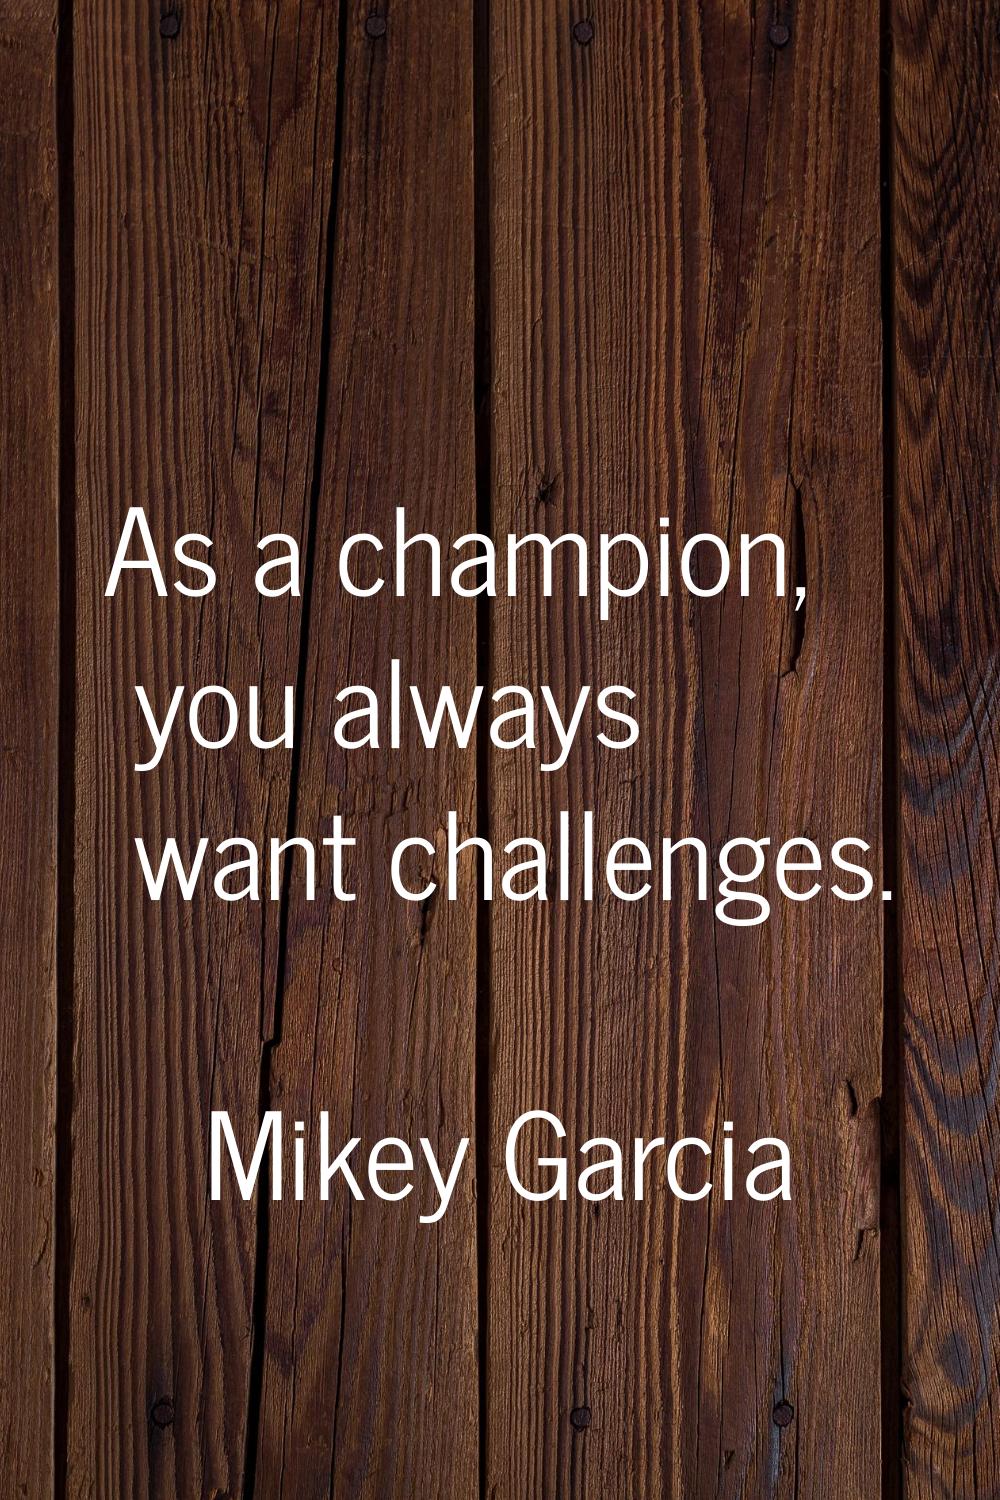 As a champion, you always want challenges.